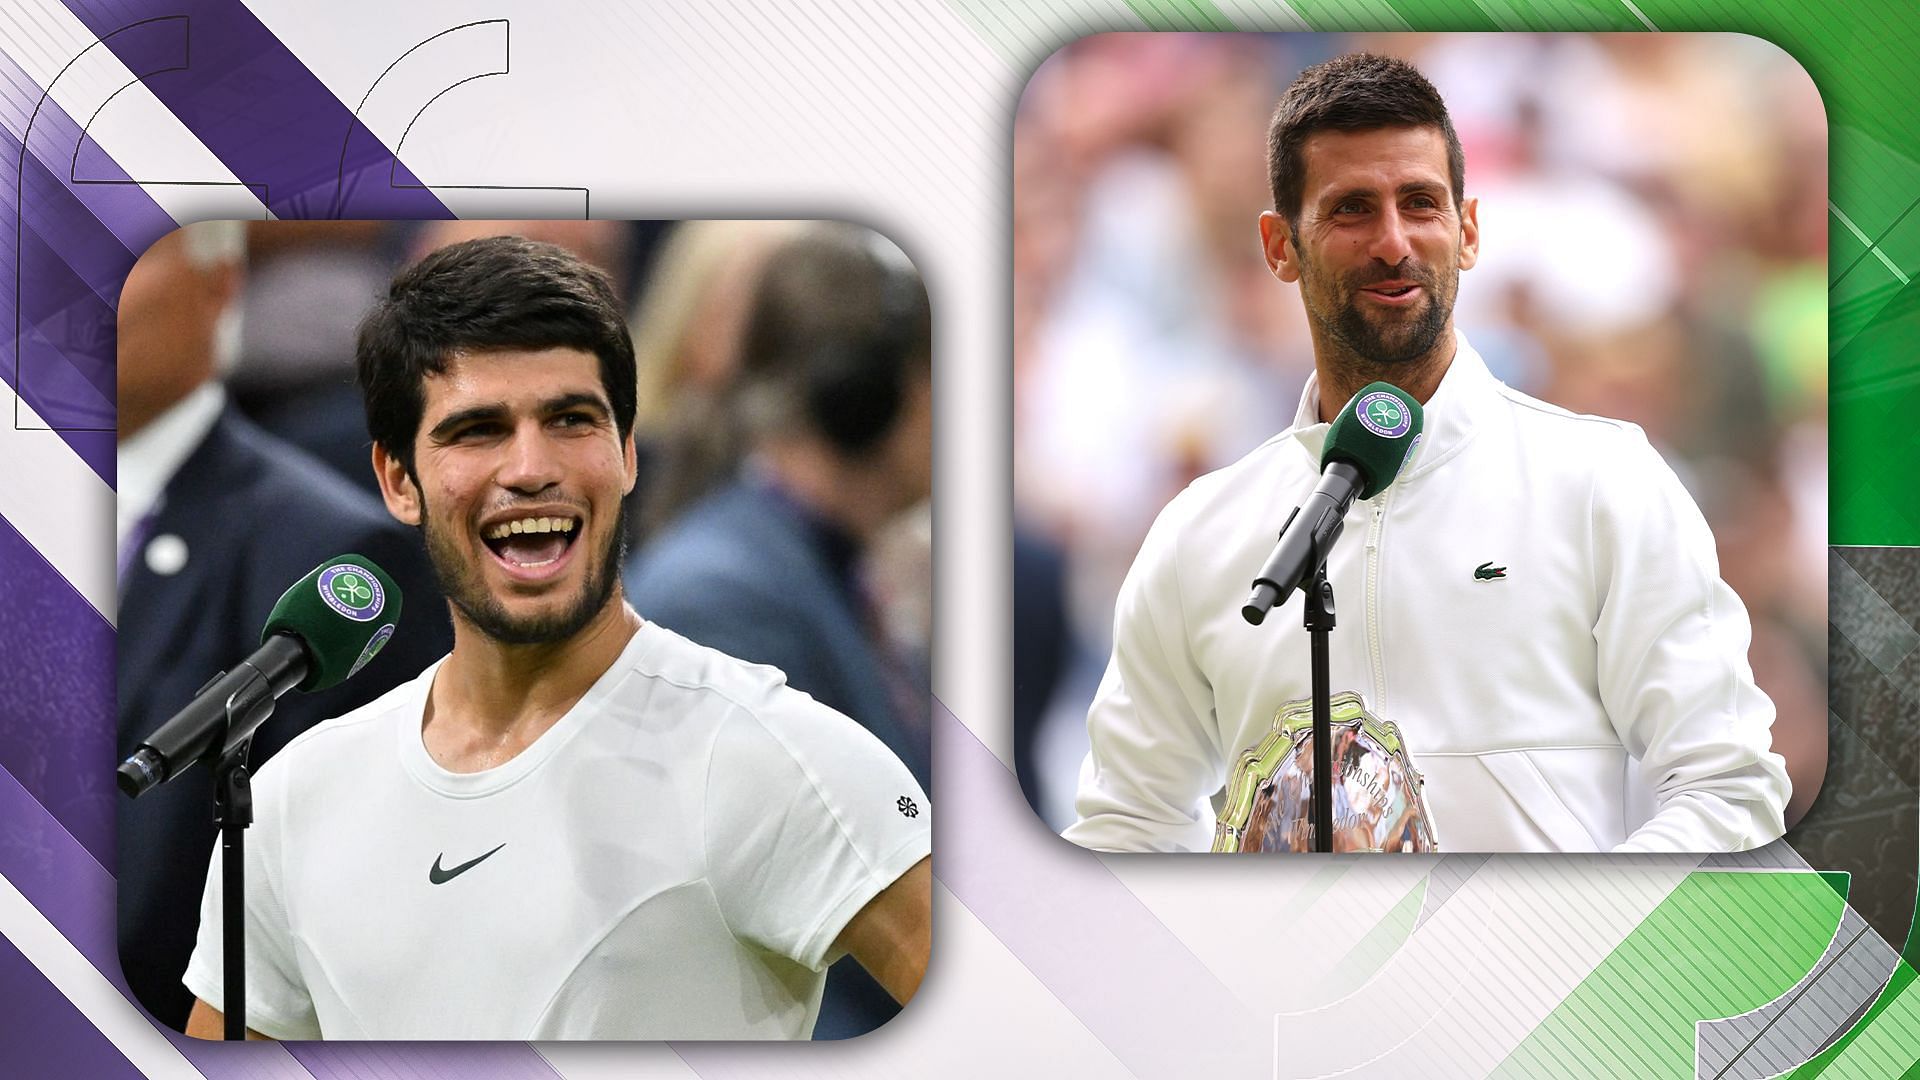 5 Most iconic quotes said by players at Wimbledon ft. Novak Djokovic, Carlos Alcaraz